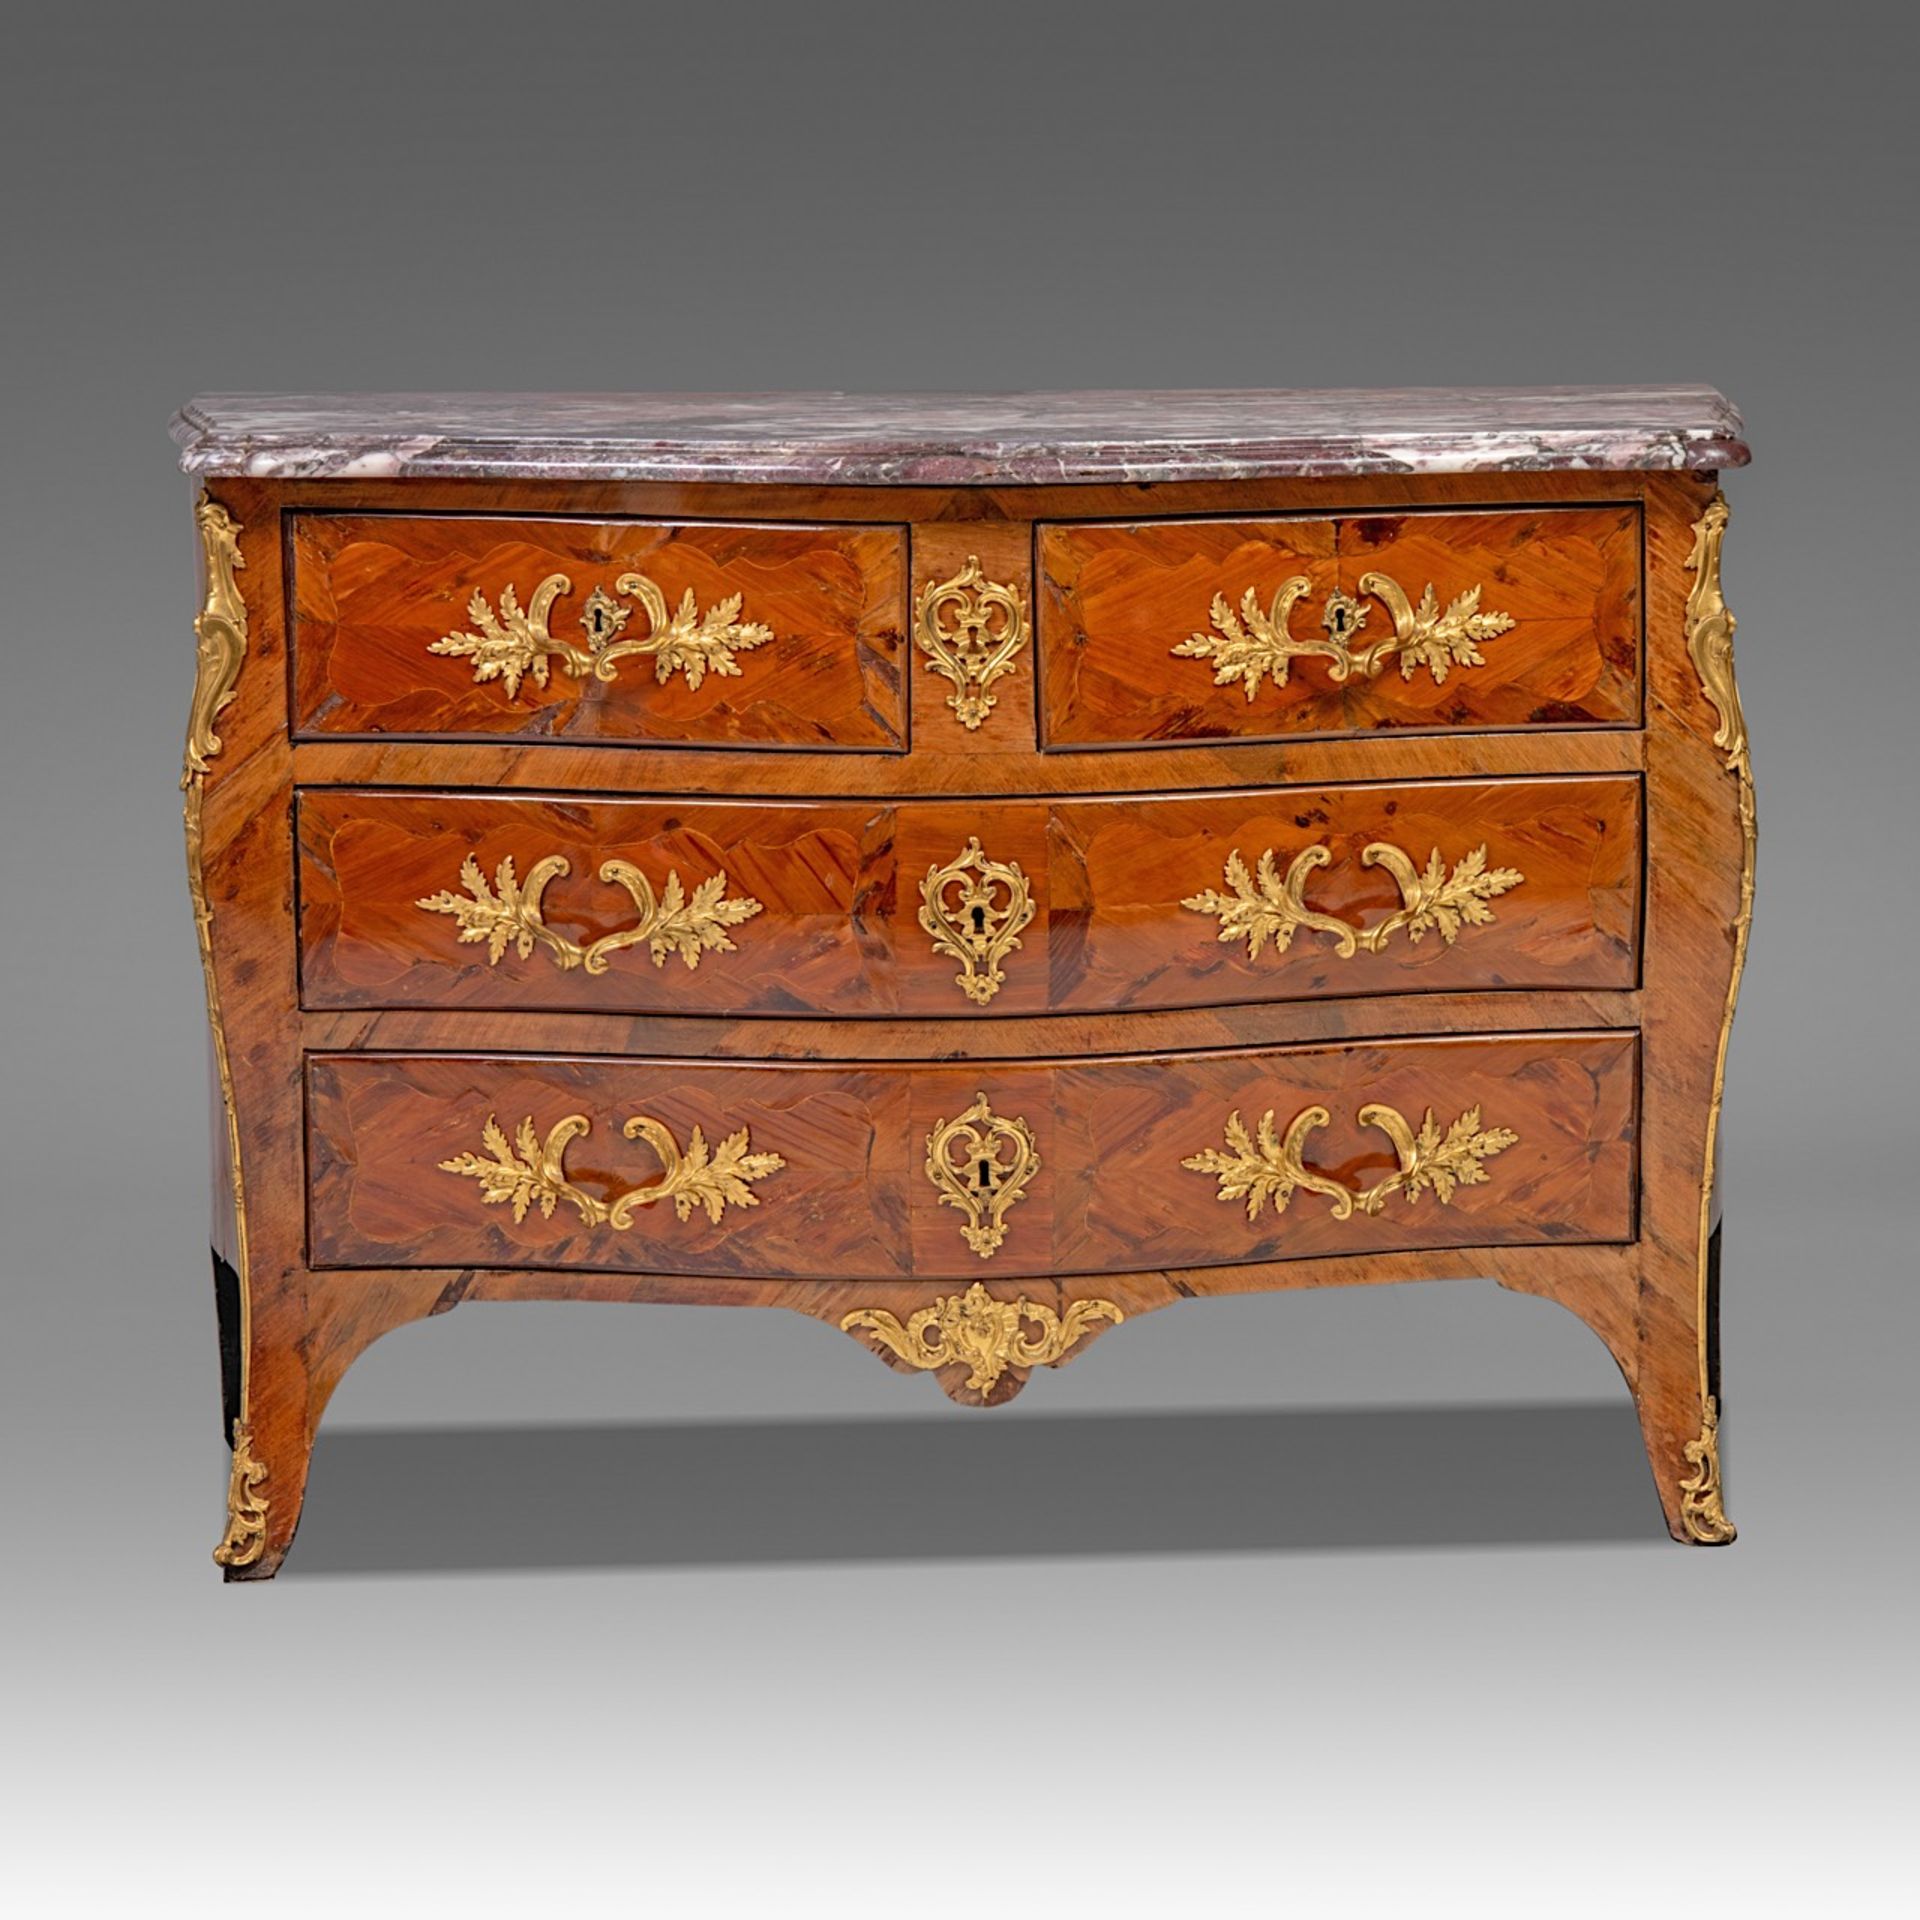 A commode a la Regence with a marble top and gilt bronze mounts, early 18thC, H 88 - W 128 - D 60 cm - Image 6 of 10